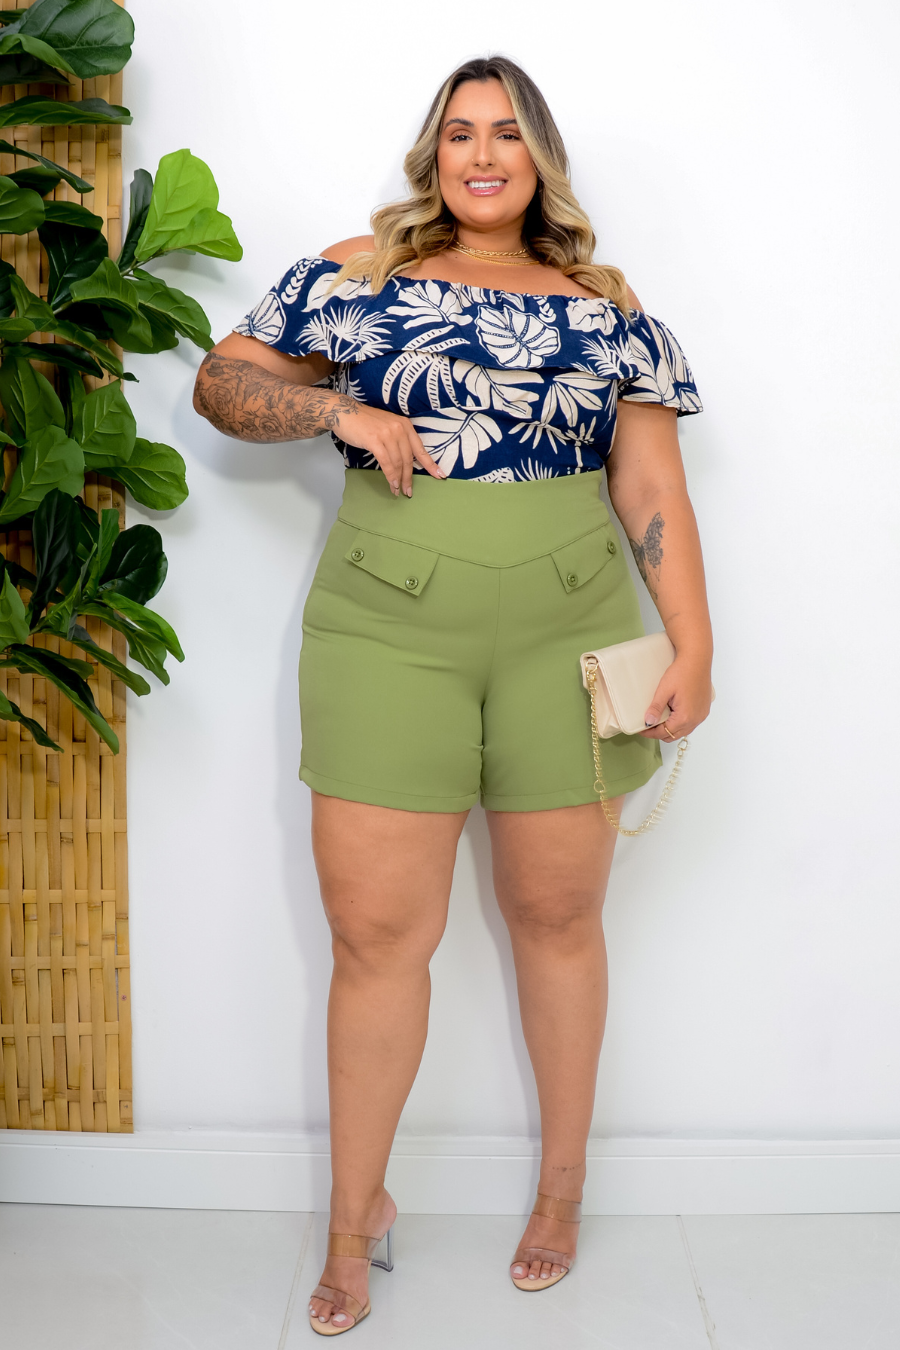 The Long and Short of Wearing Plus Size Shorts